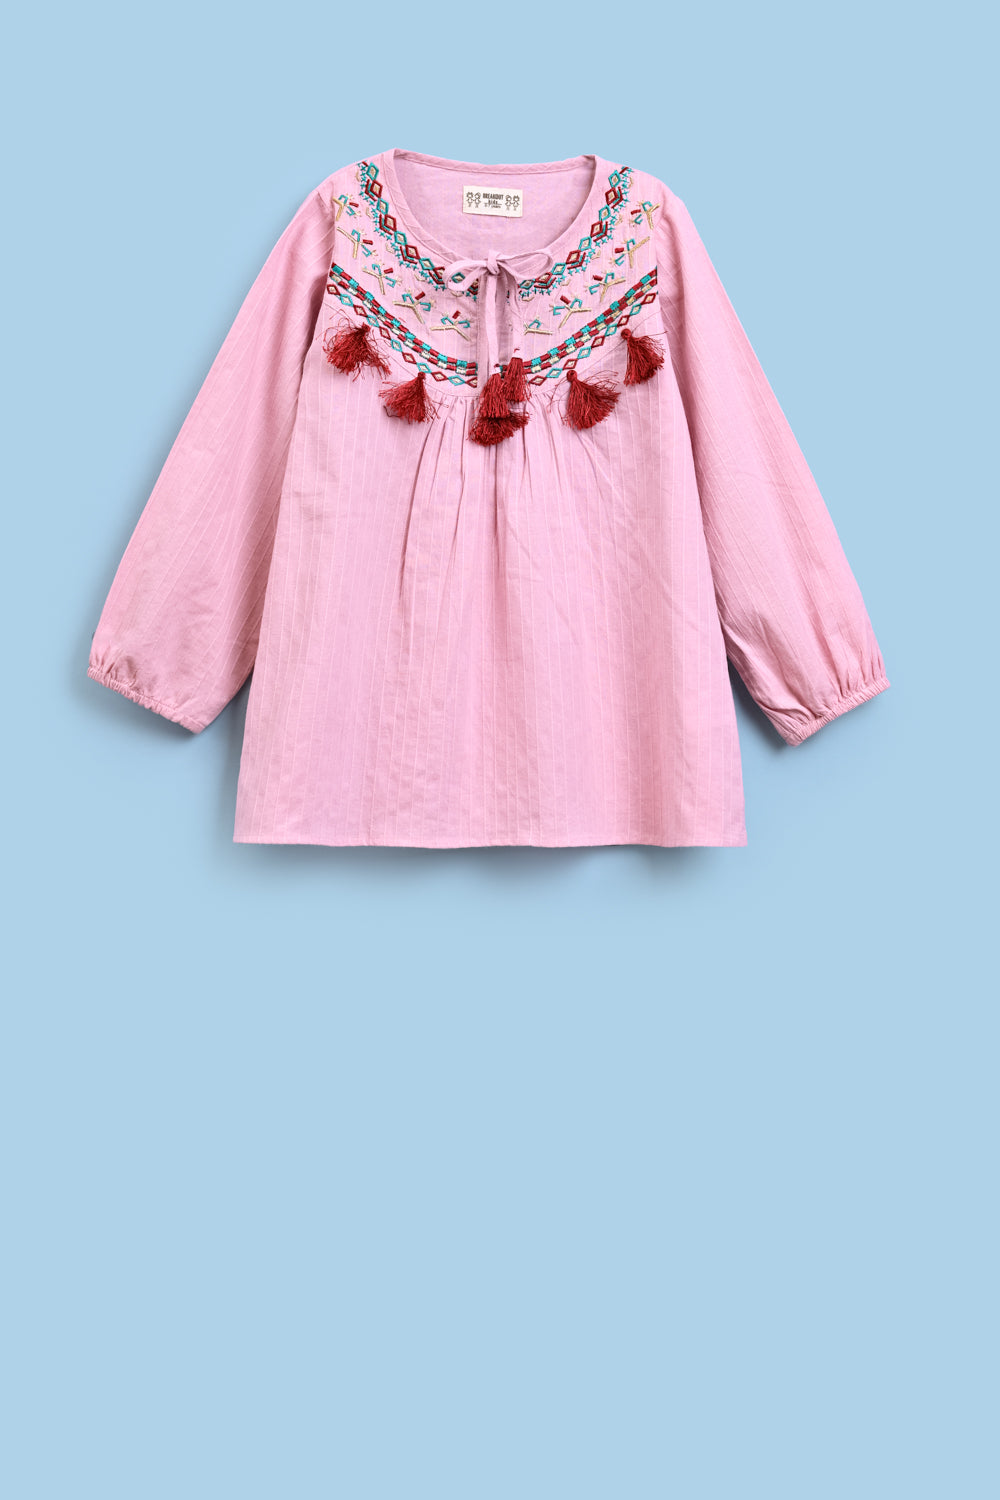 GIRLS EMBROIDERED TOP WITH TASSELS